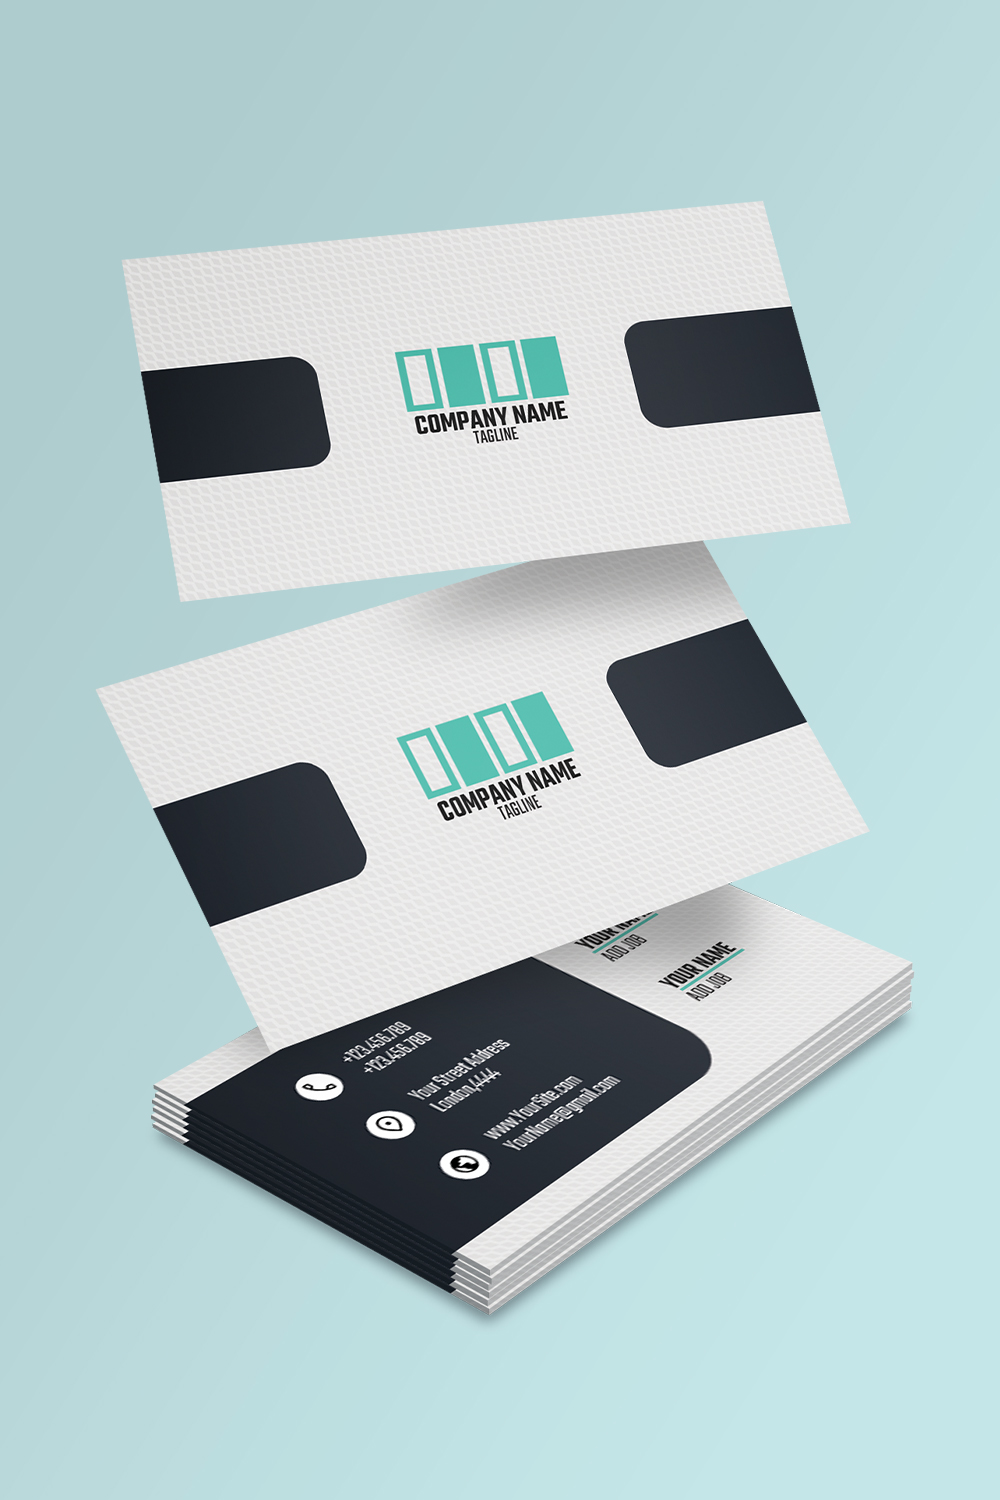 Corporate Business Card in 4 Colors Bundle pinterest image.